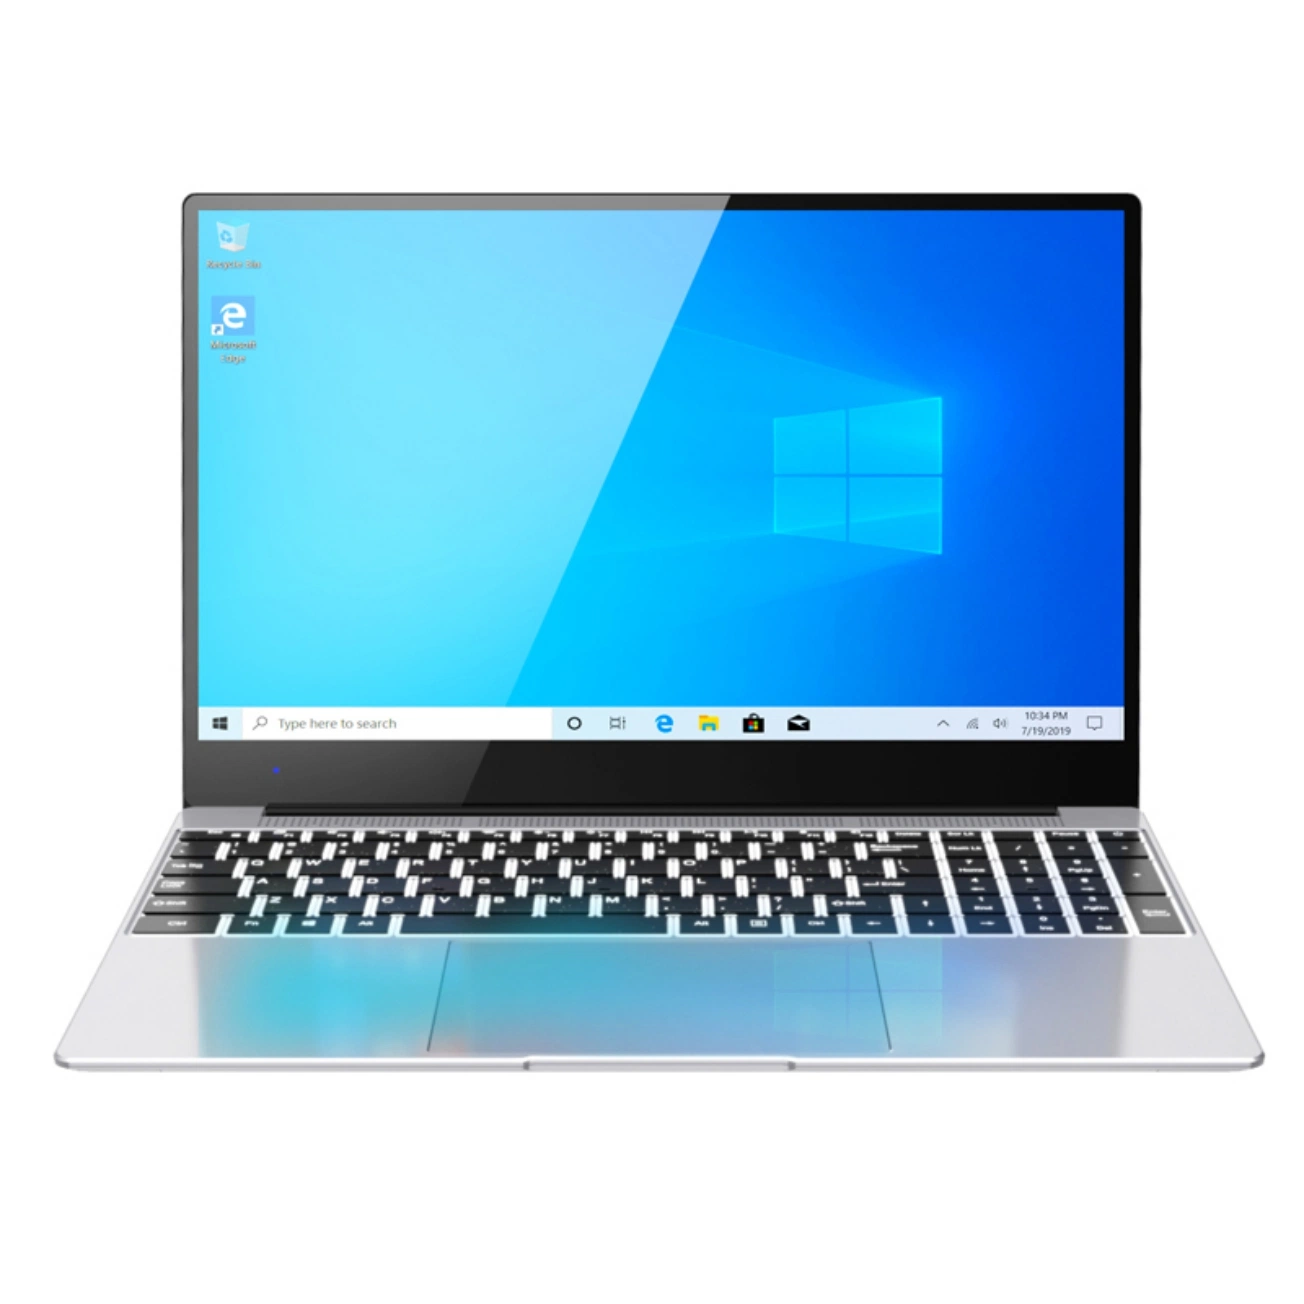 Laptop Computer Core I5 I7 10th 8+256GB1920*1080P 15.6 Inch Laptop with Camera RJ45 156 Inch Notebook PC